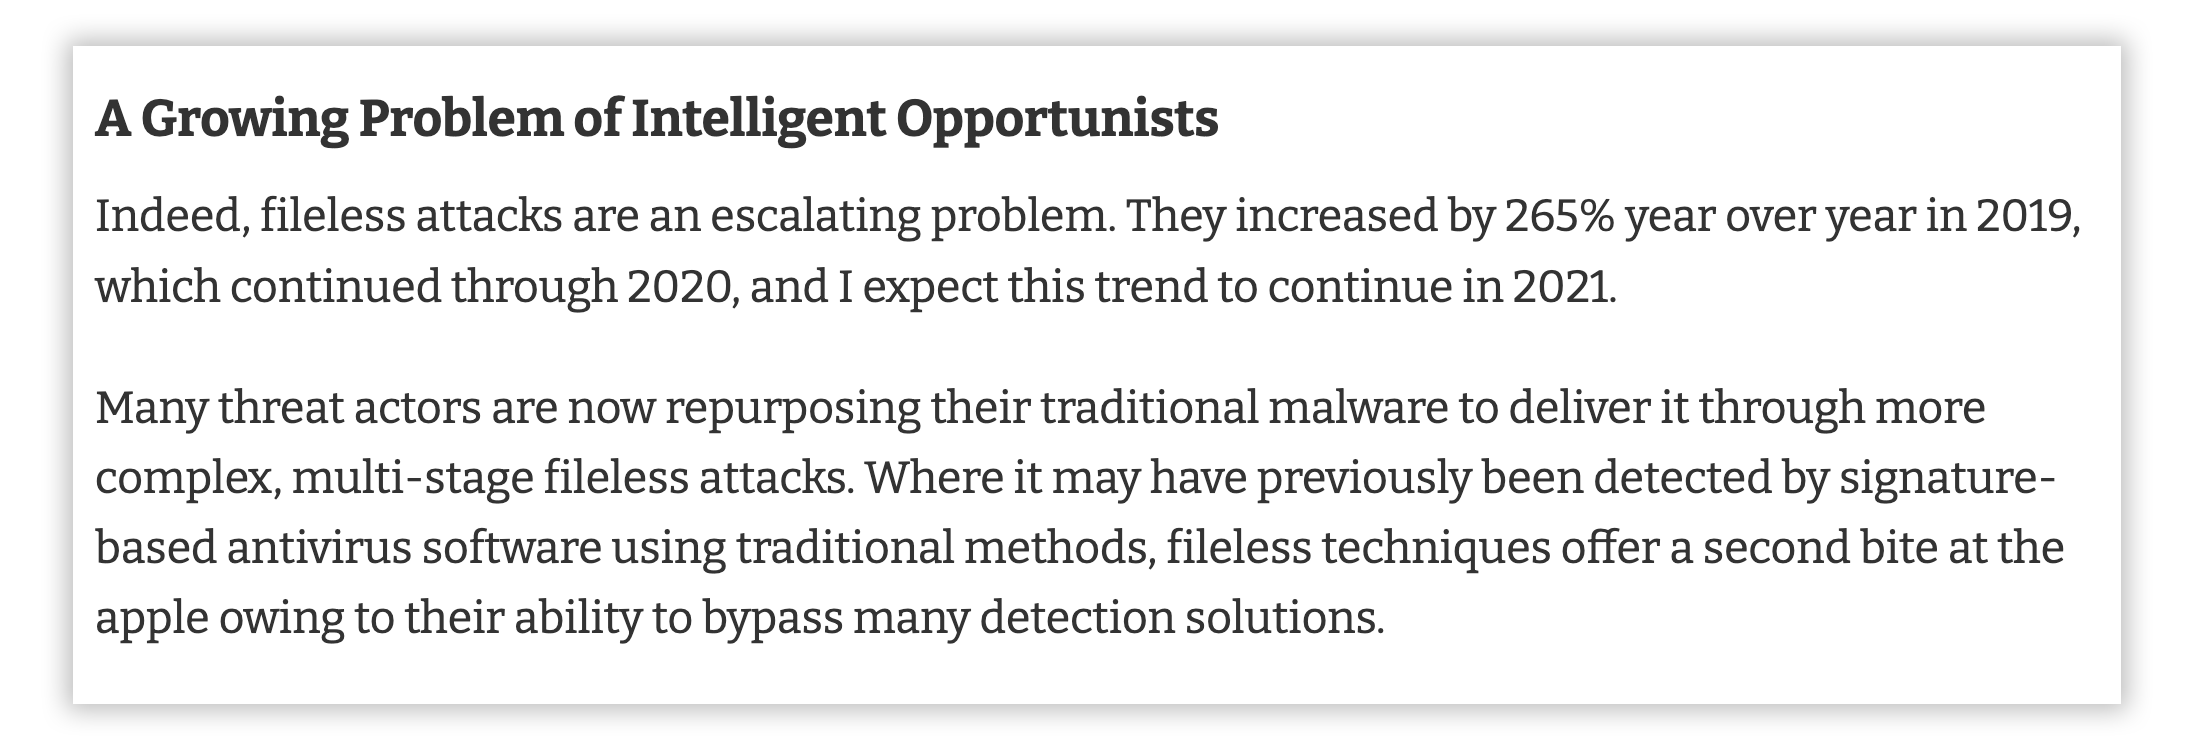 Figure 1: Fileless attacks are growing in number and bypassing traditional endpoint security